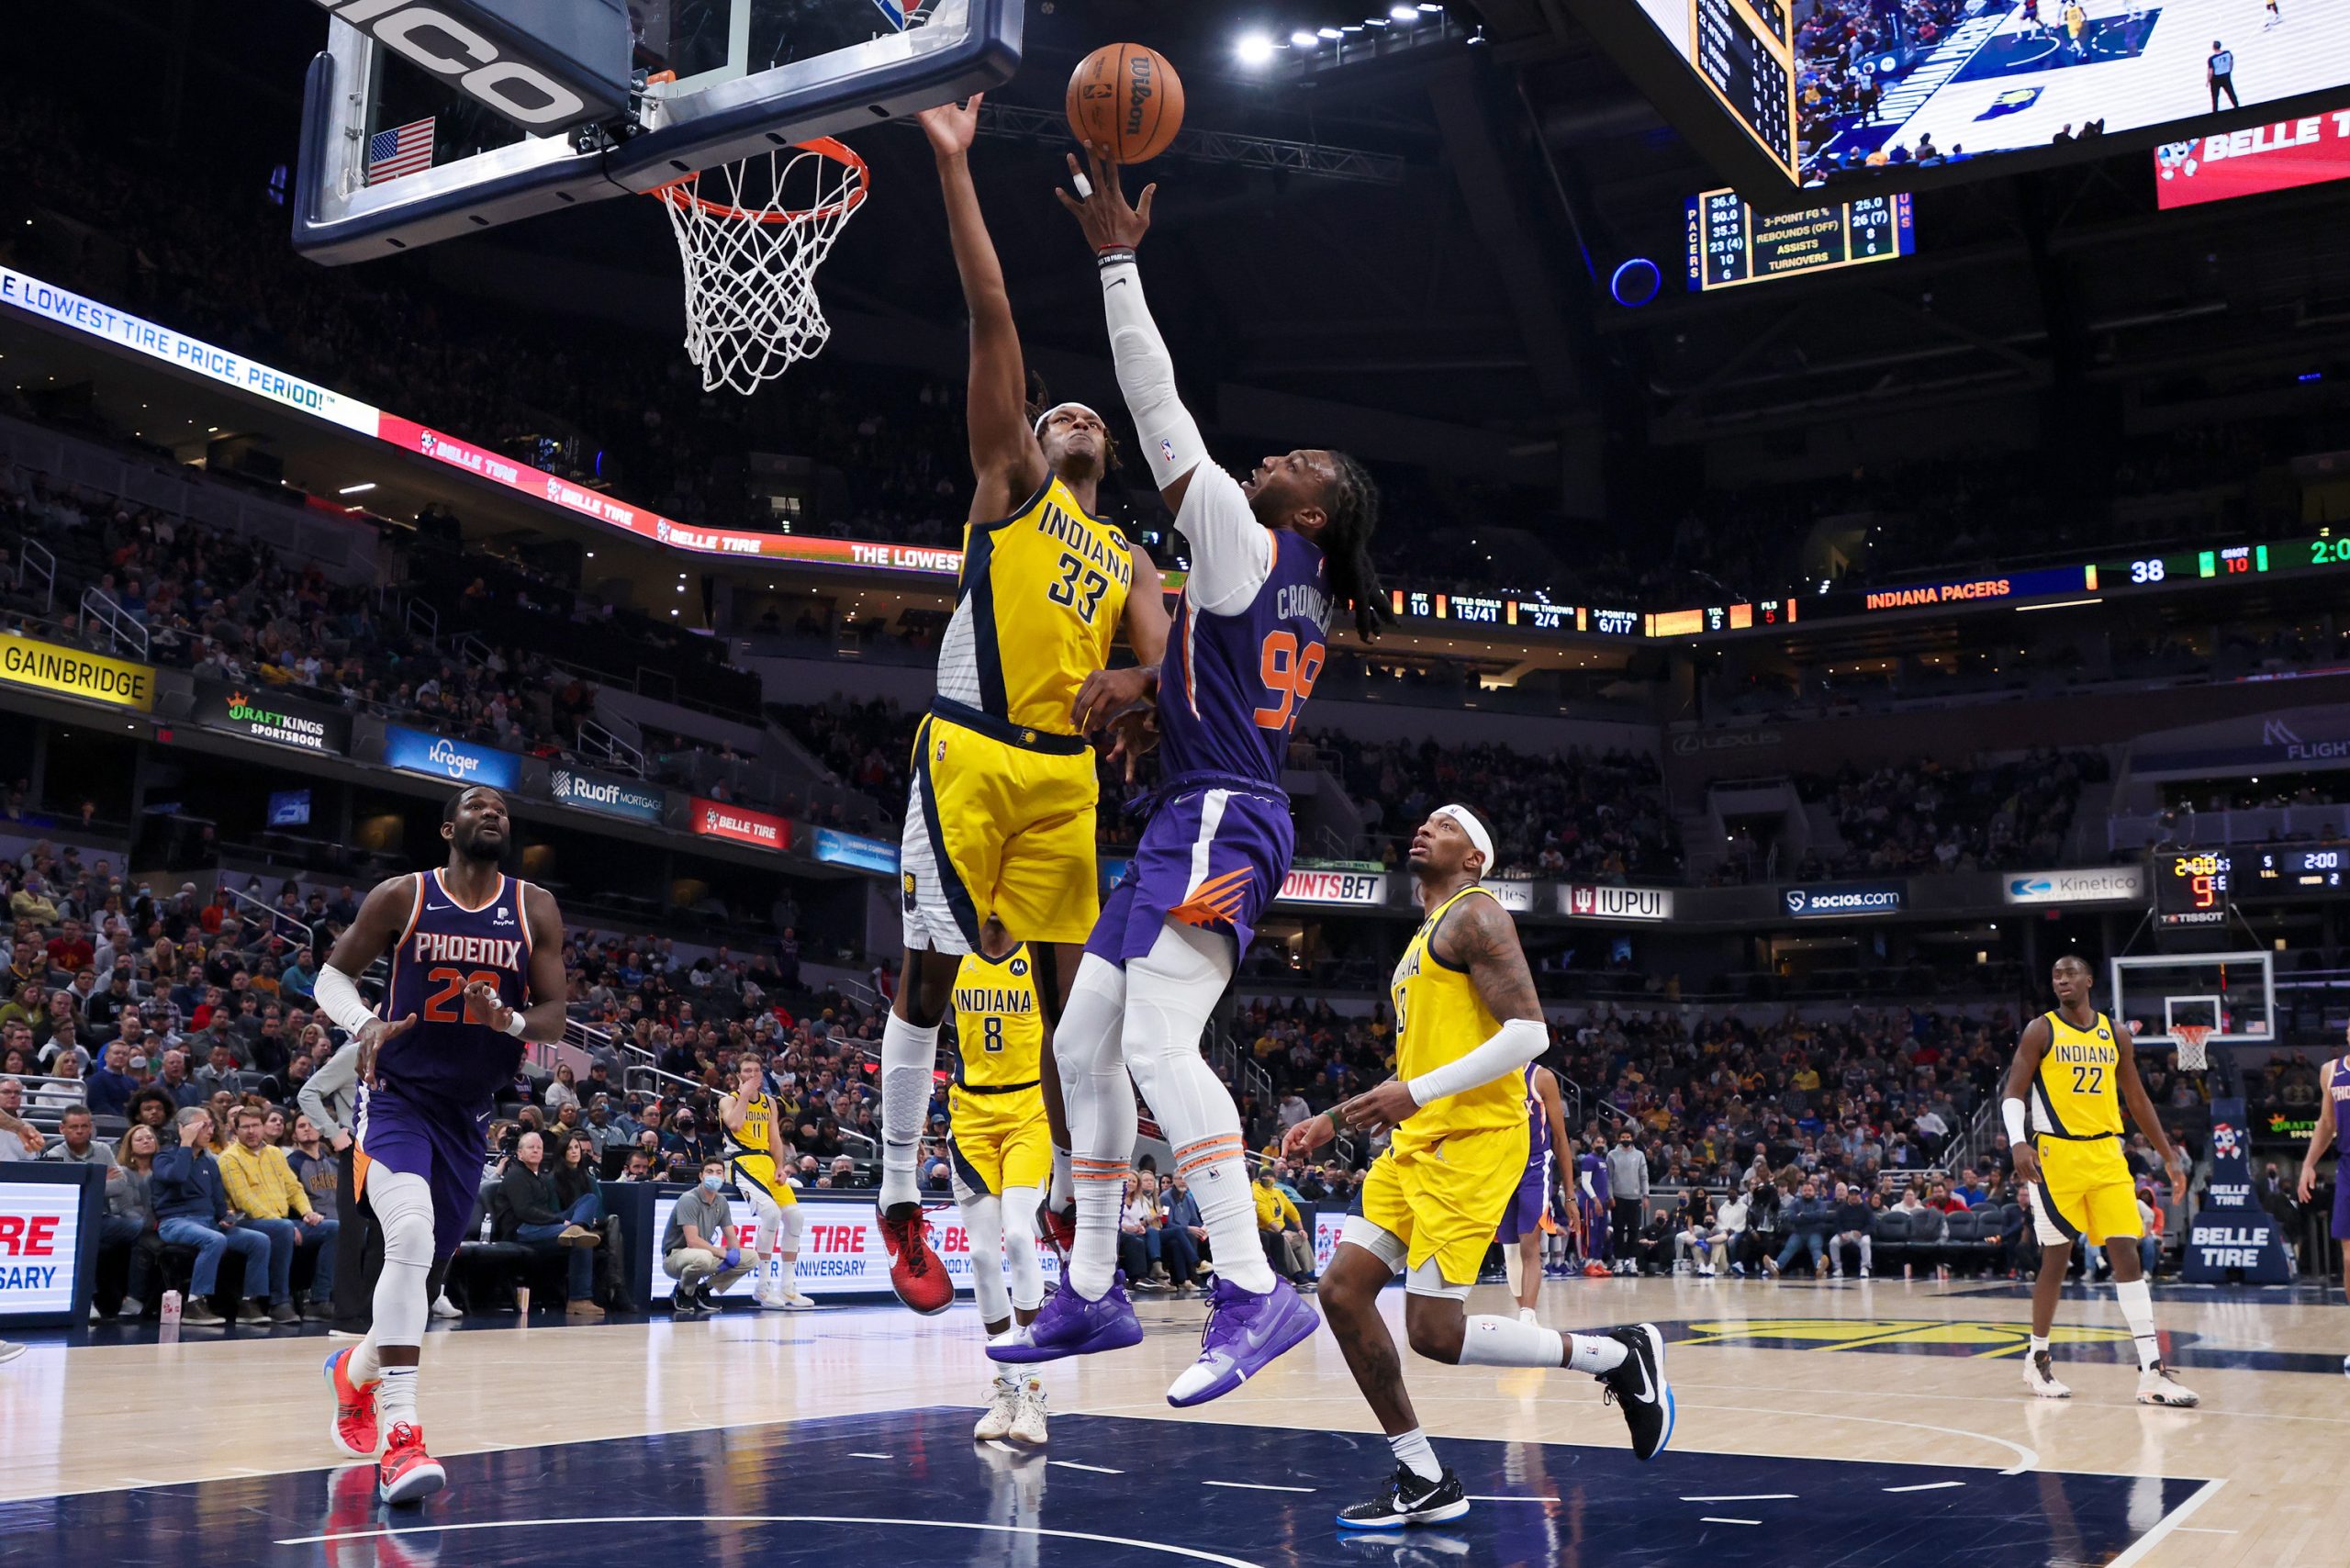 Indiana Pacers big man Myles Turner tries to block Memphis Grizzlies forward Jae Crowder's shot during an NBA game in January 2022